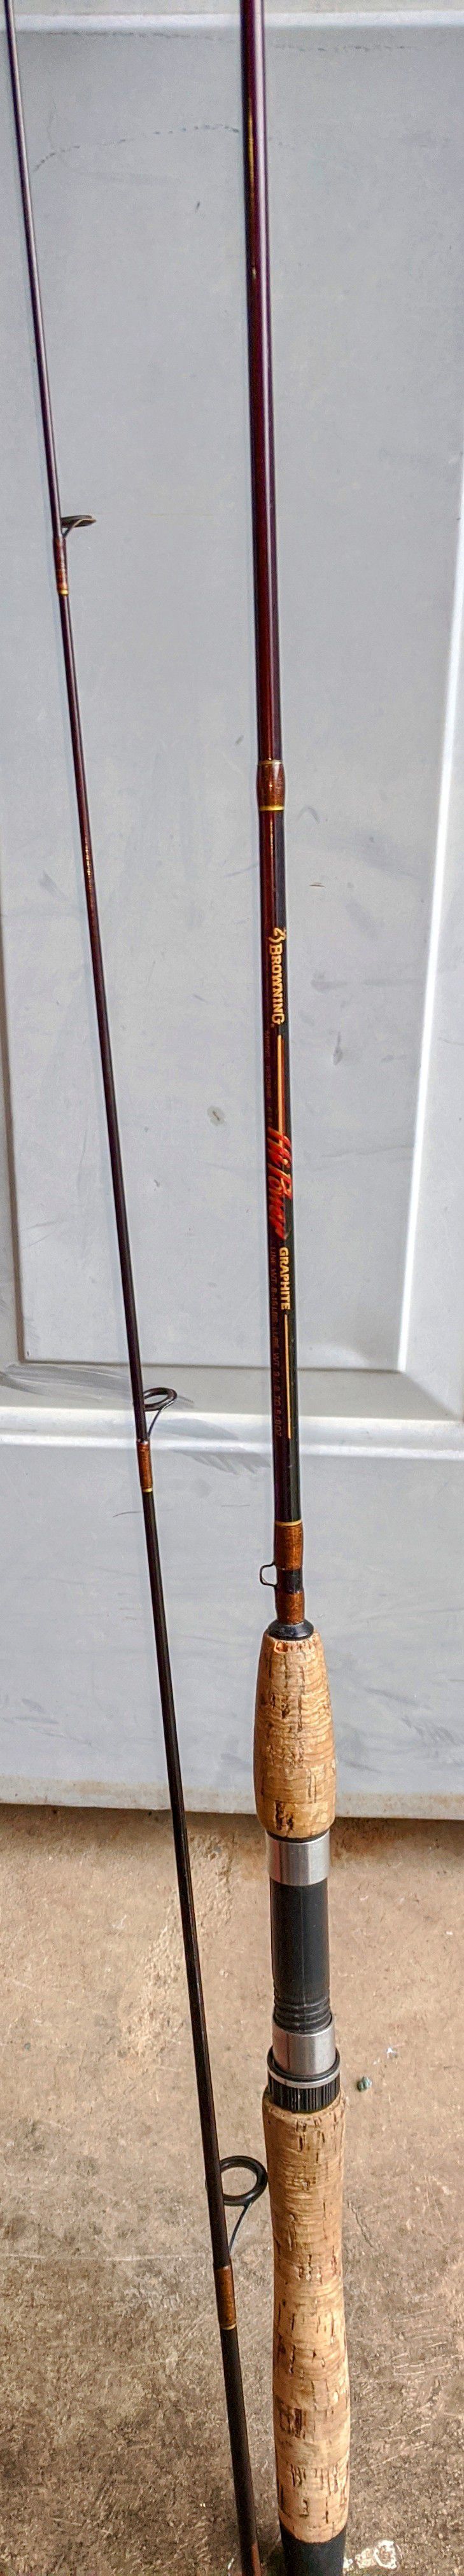 Browning Hi-Power Vintage Graphite Fishing Rod EXCELLENT COND. for